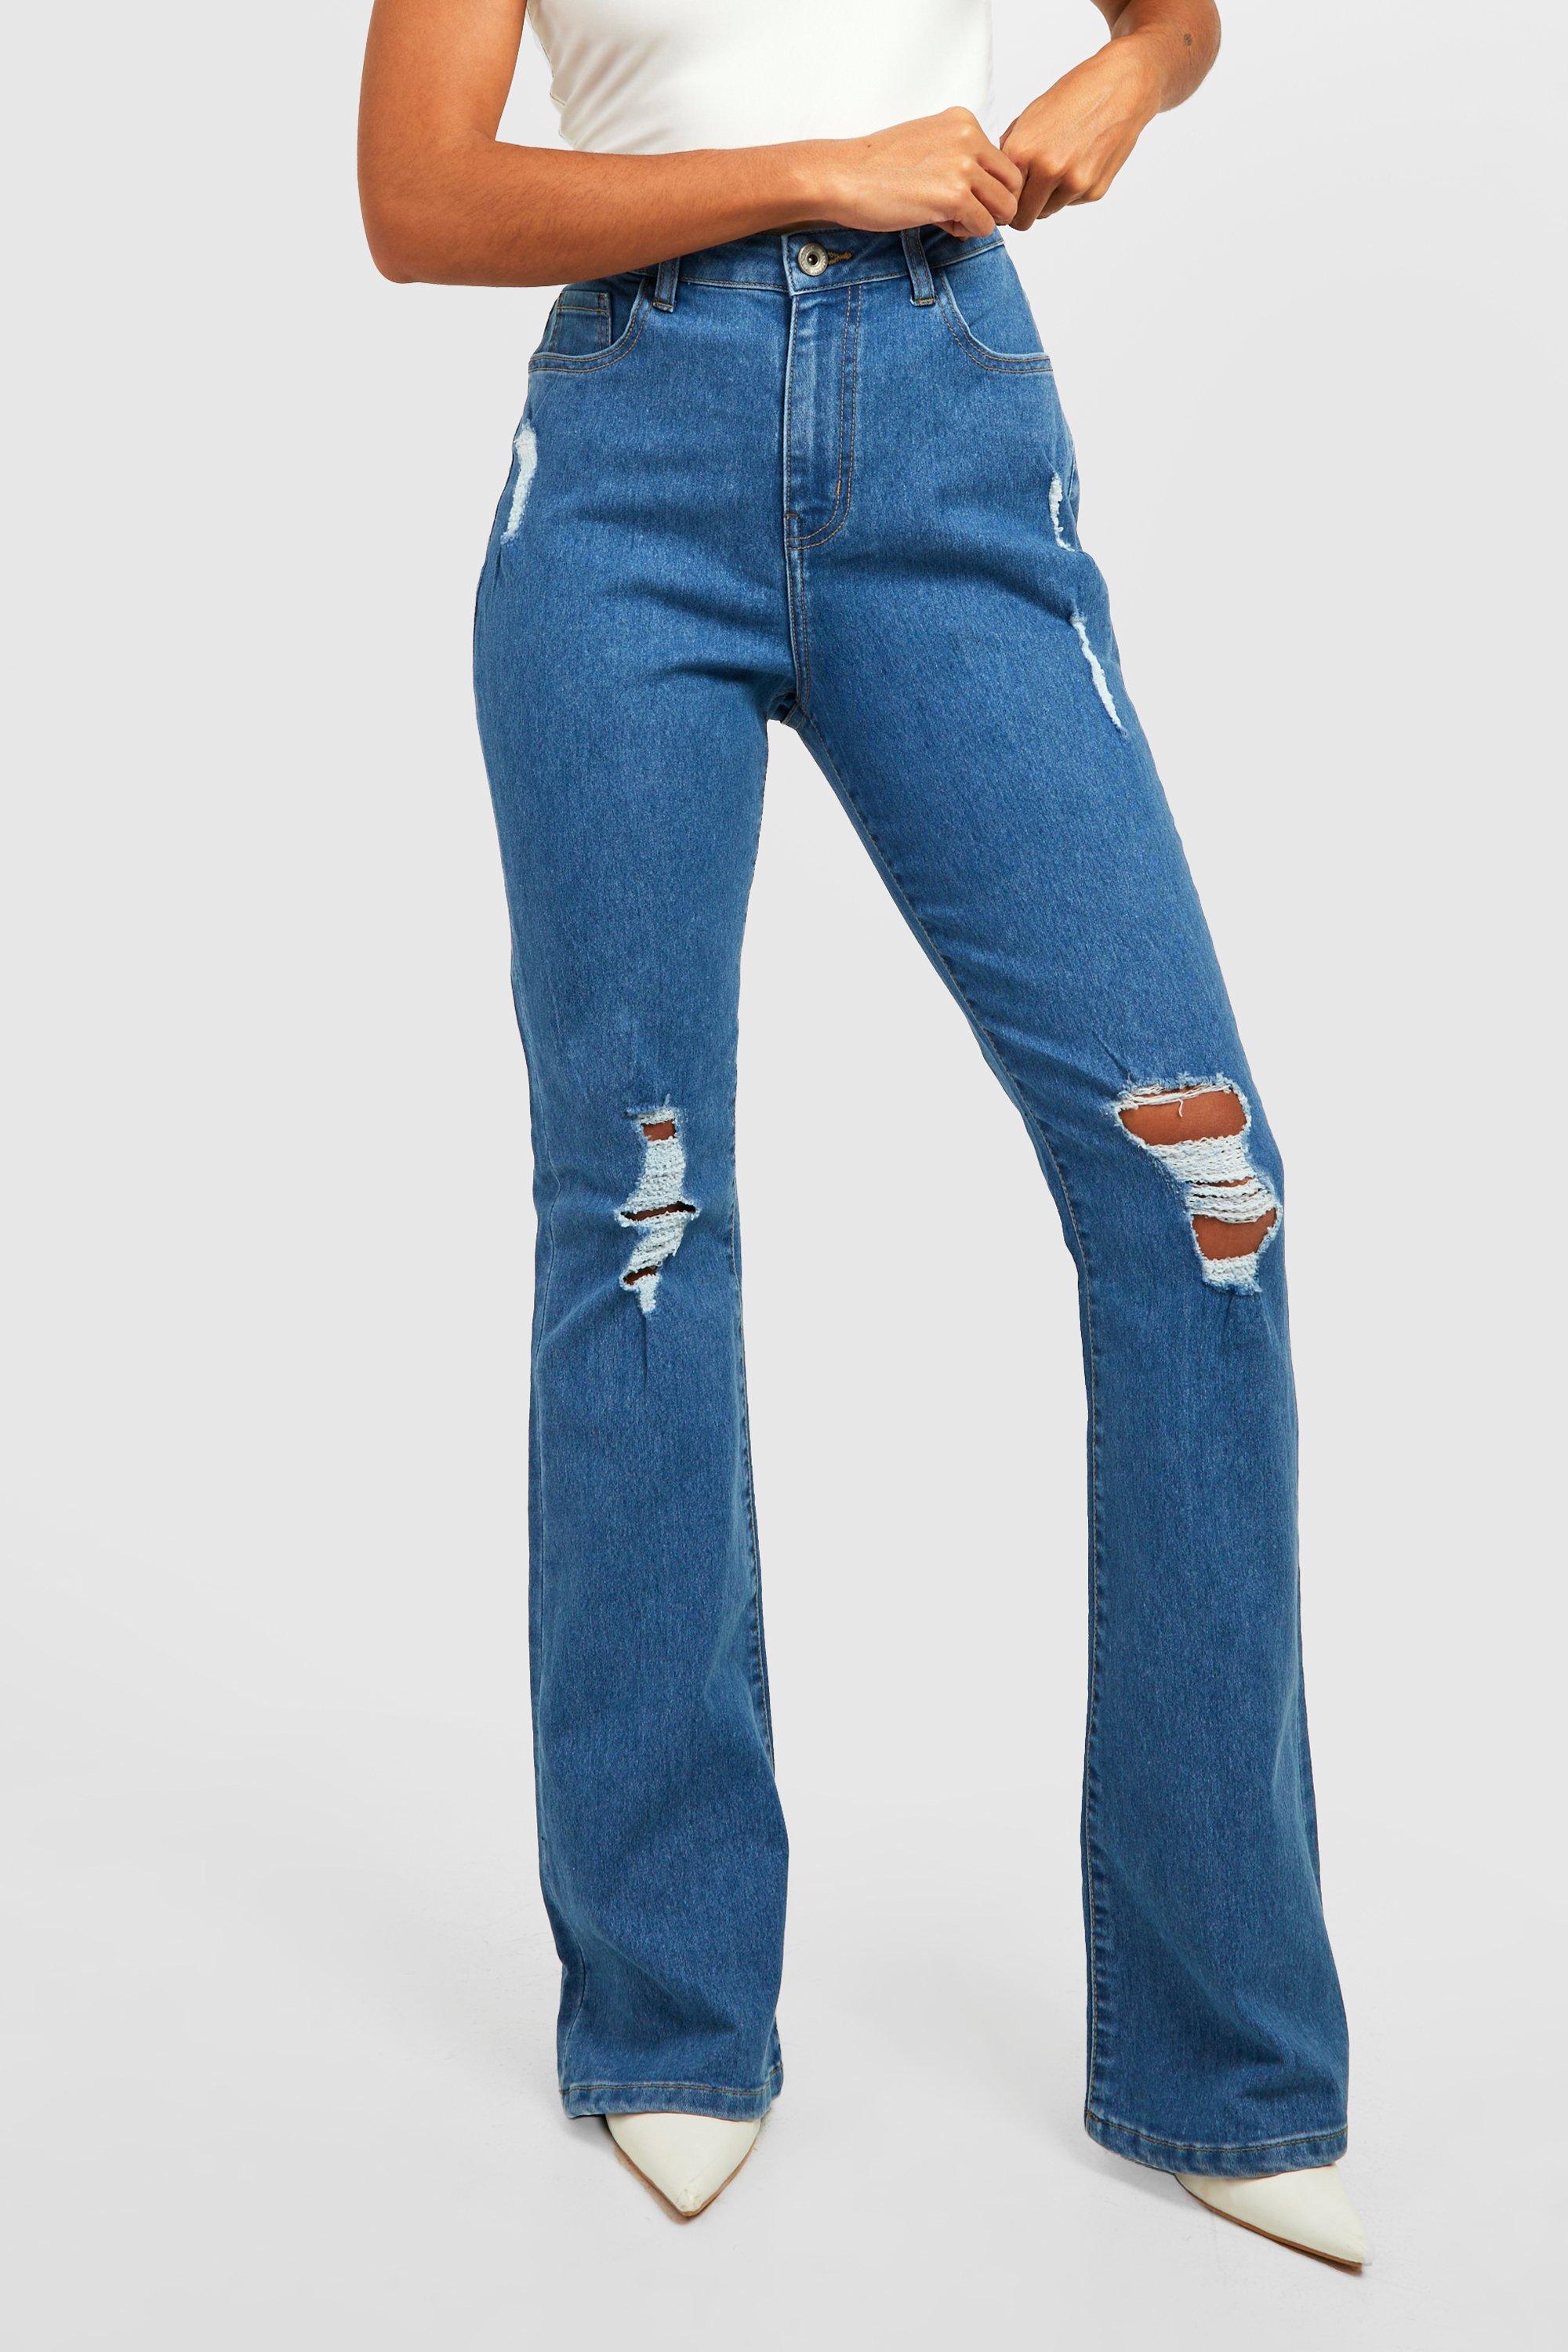 Mid Blue High Waisted Flare Ripped Jeans, Womens Jeans